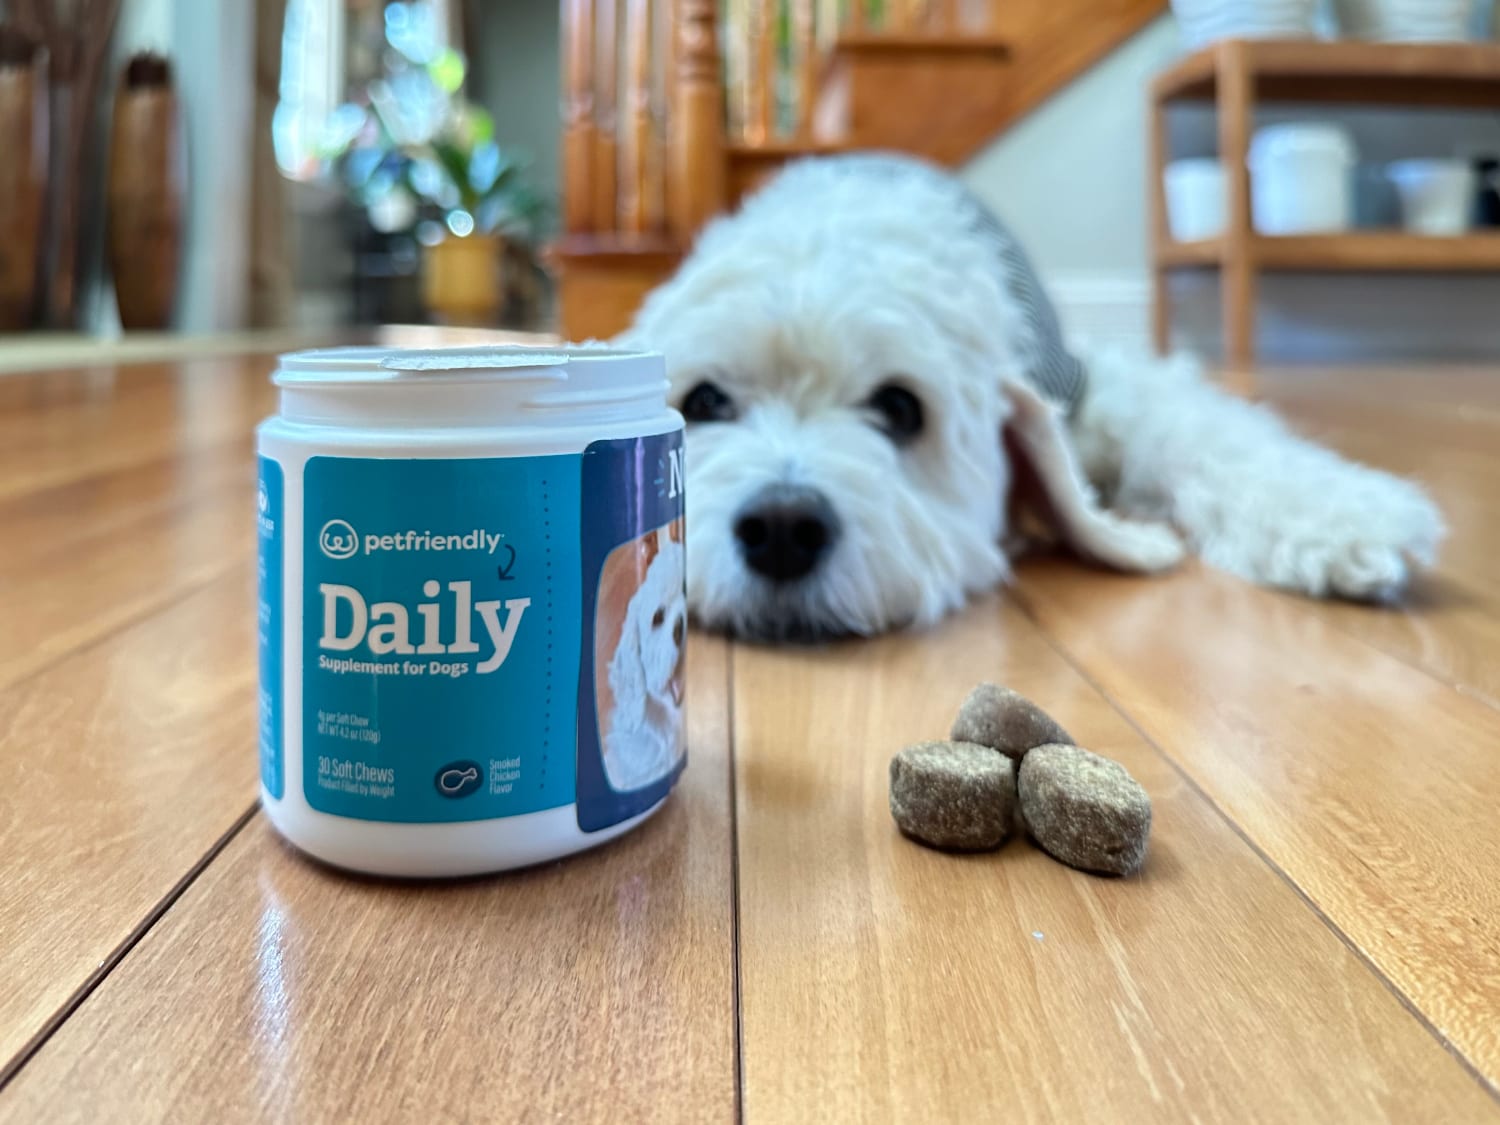 PetFriendly - daily supplement with nora in the background